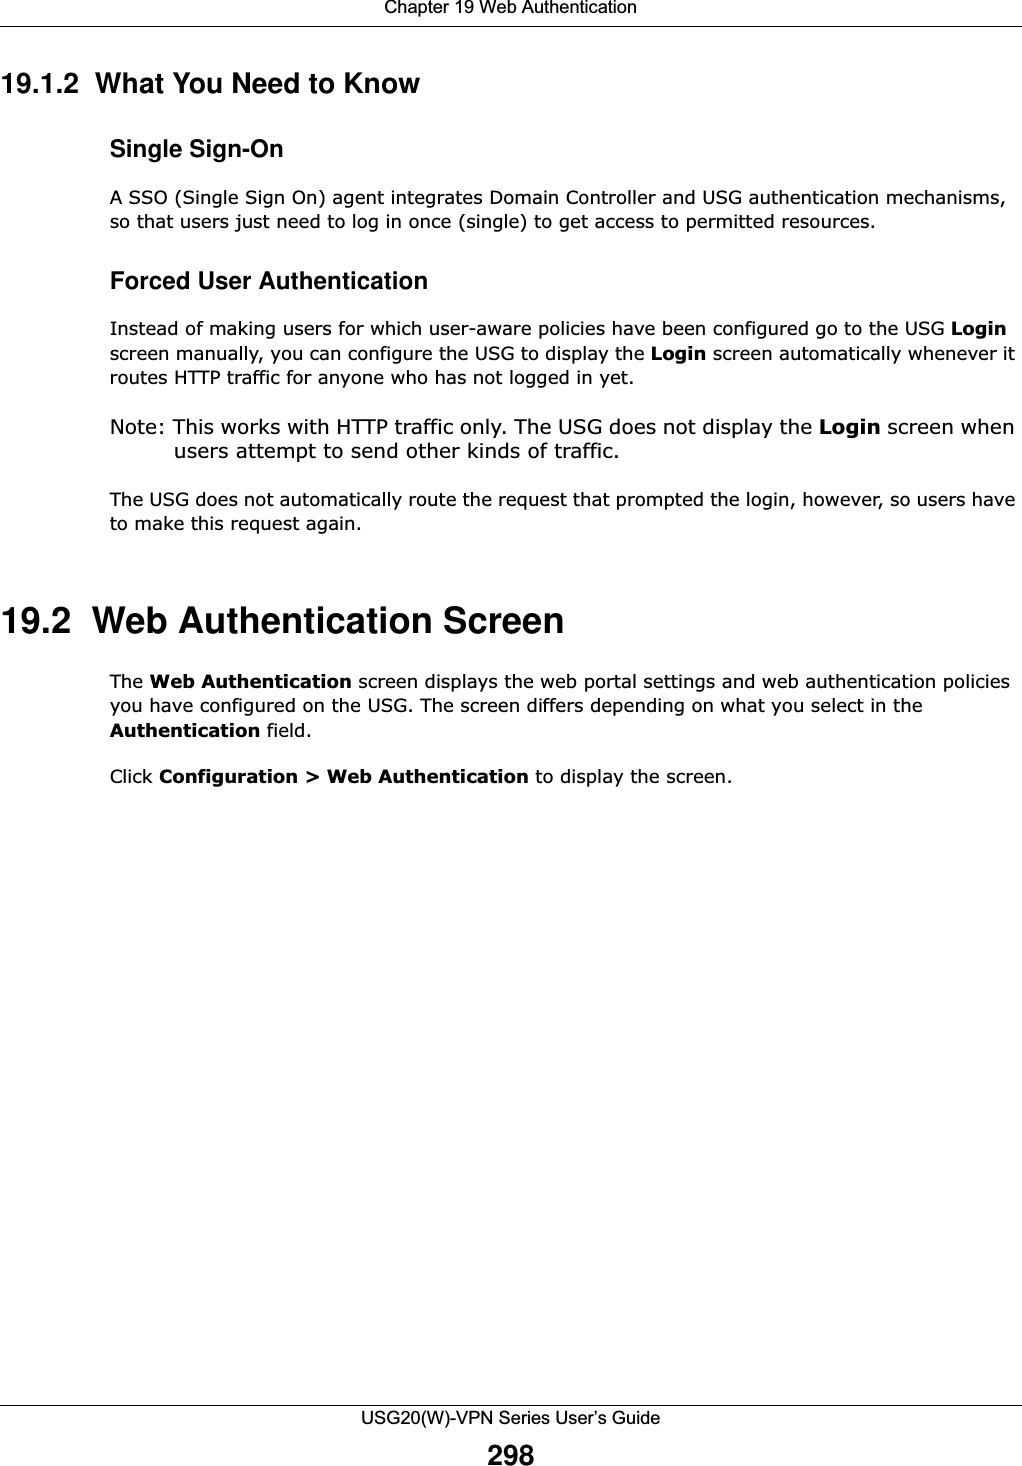 Chapter 19 Web AuthenticationUSG20(W)-VPN Series User’s Guide29819.1.2  What You Need to KnowSingle Sign-OnA SSO (Single Sign On) agent integrates Domain Controller and USG authentication mechanisms, so that users just need to log in once (single) to get access to permitted resources.Forced User AuthenticationInstead of making users for which user-aware policies have been configured go to the USG Login screen manually, you can configure the USG to display the Login screen automatically whenever it routes HTTP traffic for anyone who has not logged in yet. Note: This works with HTTP traffic only. The USG does not display the Login screen when users attempt to send other kinds of traffic.The USG does not automatically route the request that prompted the login, however, so users have to make this request again.19.2  Web Authentication ScreenThe Web Authentication screen displays the web portal settings and web authentication policies you have configured on the USG. The screen differs depending on what you select in the Authentication field.Click Configuration &gt; Web Authentication to display the screen. 